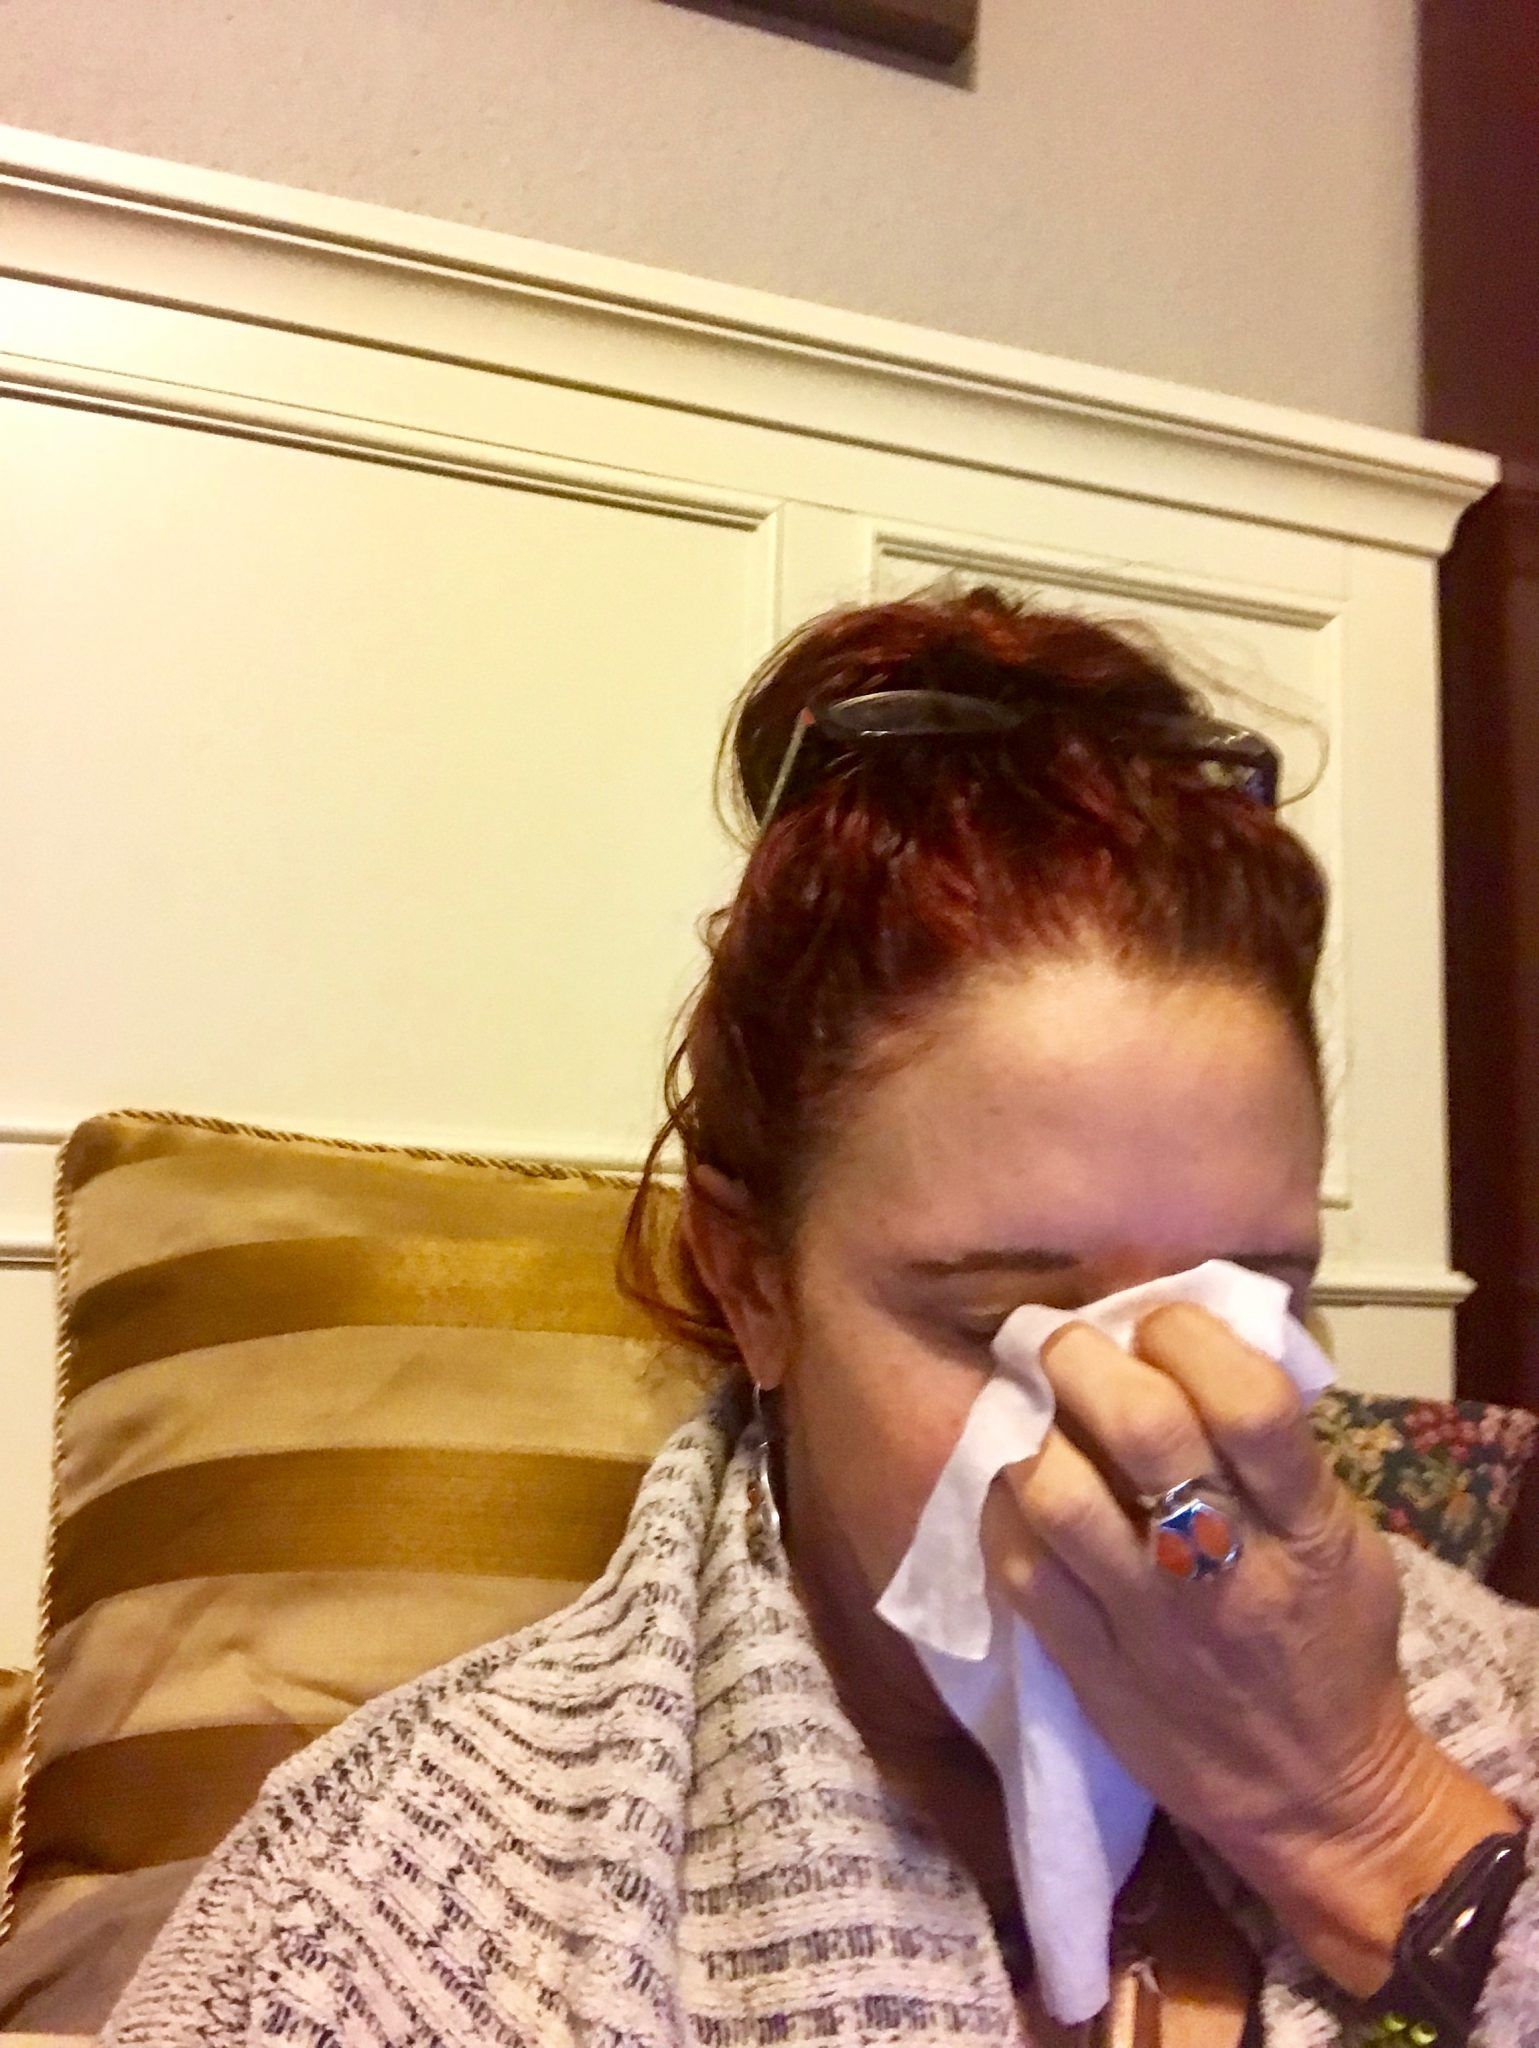 A woman who got sick while traveling